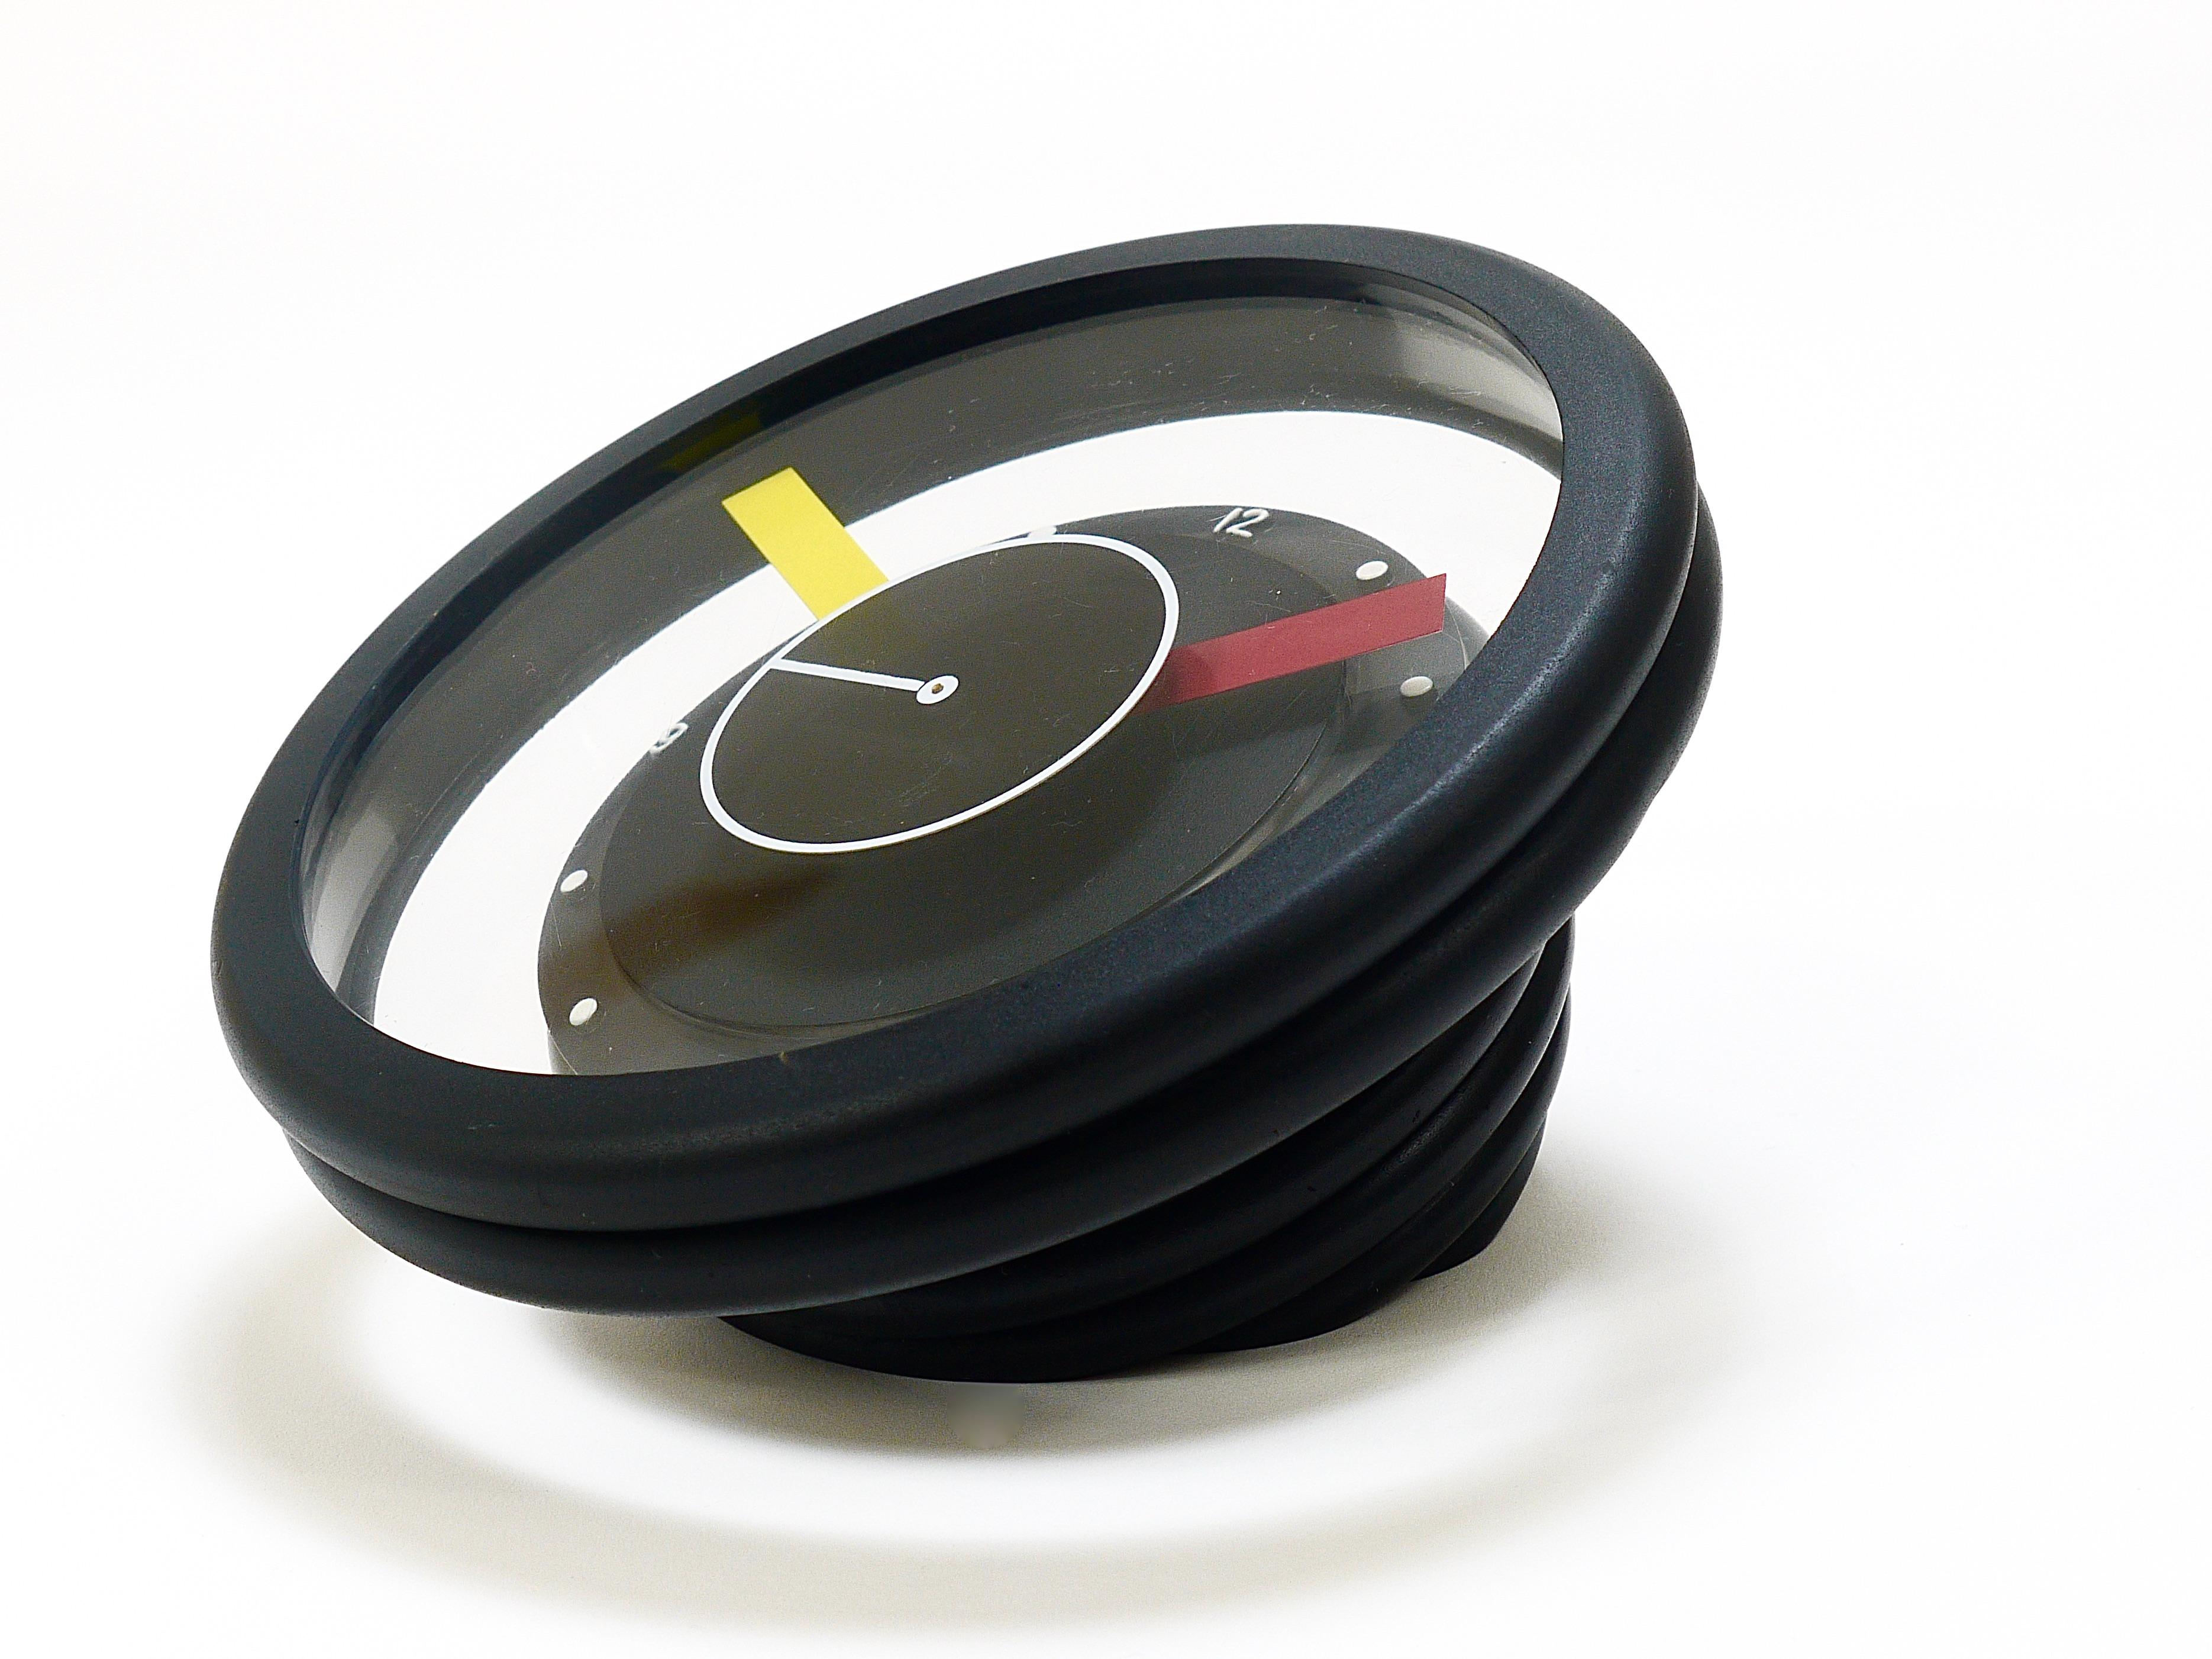 Postmodern Round Pop Art Desk or Table Clock, Memphis Milano Style, Italy, 1990s For Sale 9